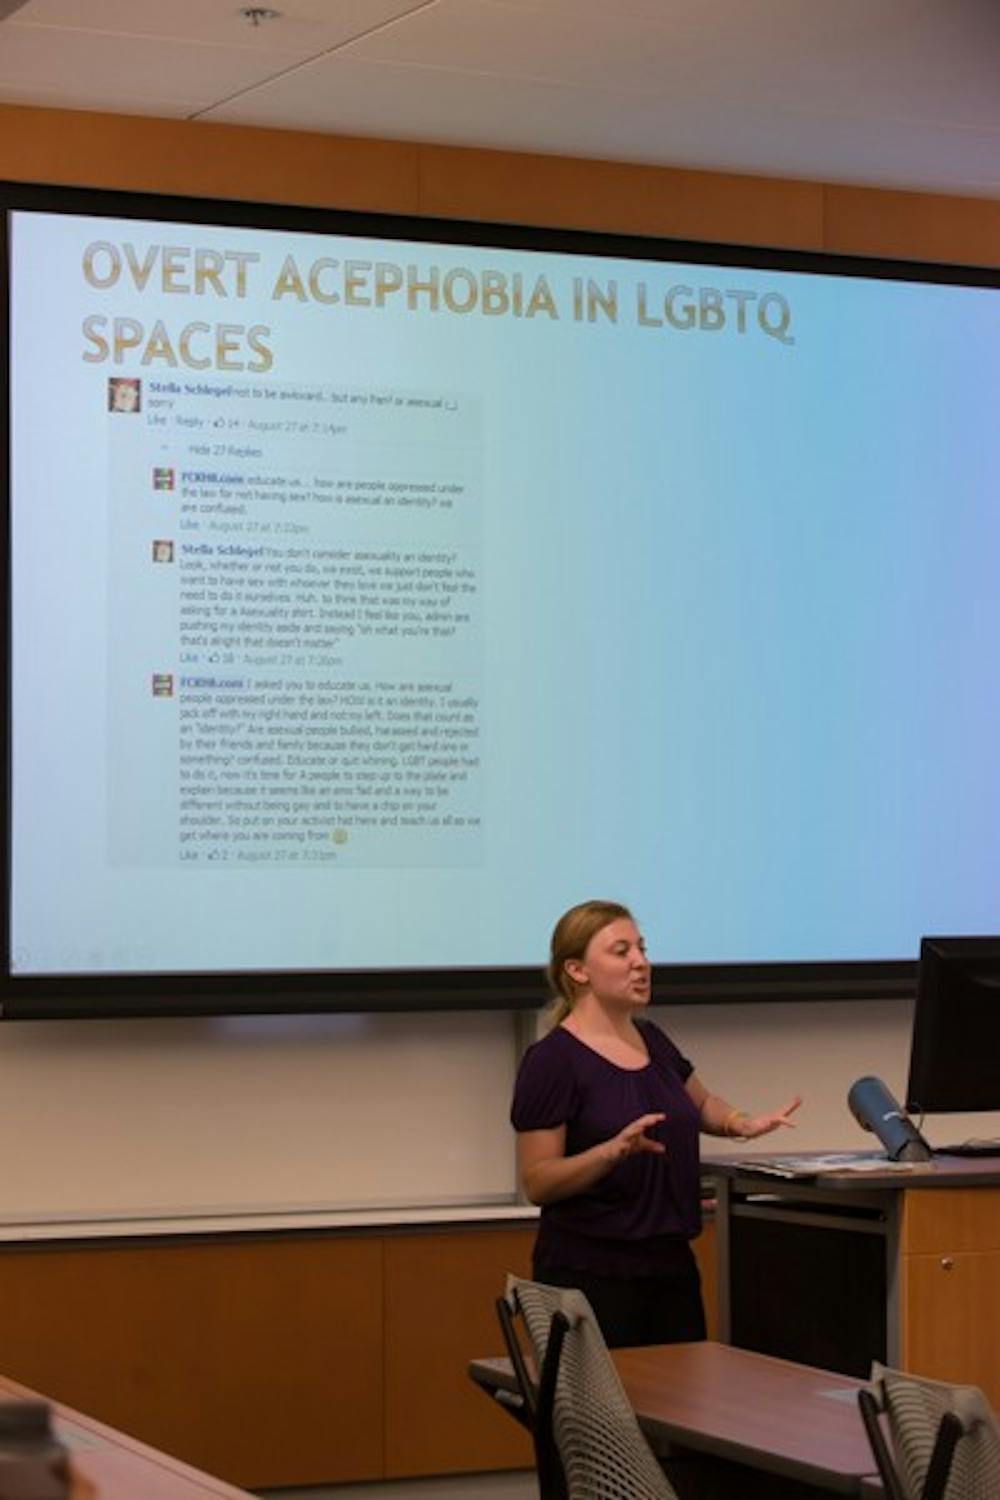 Aces of Arizona president Gretchen Ayub speaks to a group of students about asexuality during a discussion in Tempe on April 9. (Photo by Andrew Ybanez)